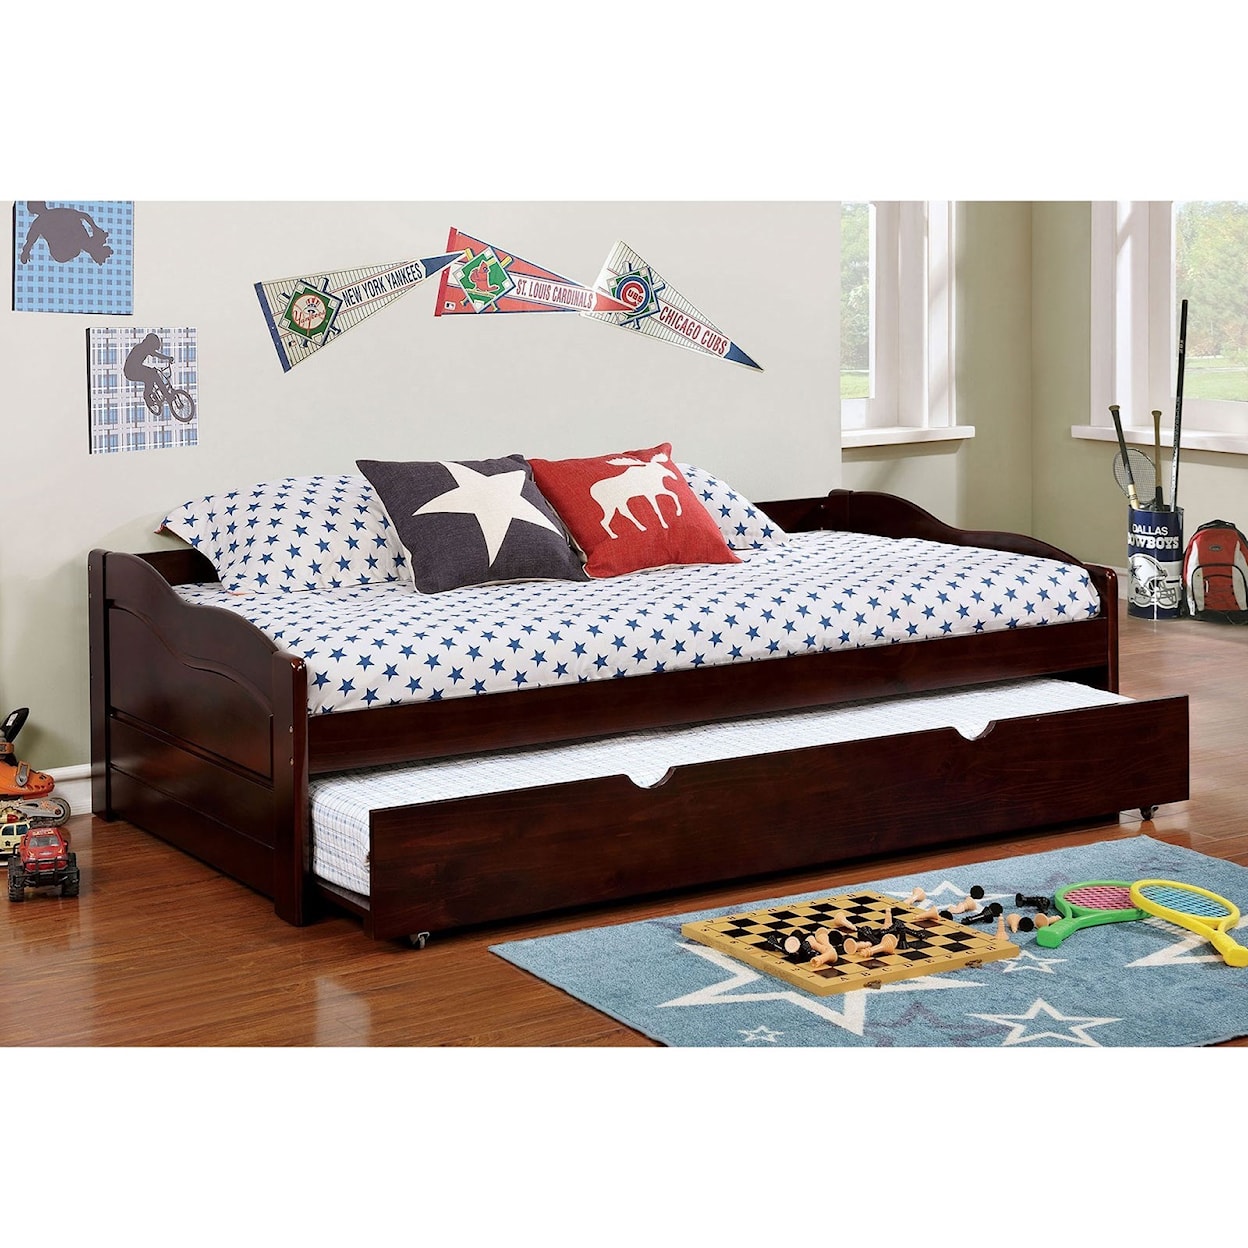 Furniture of America Sunset Daybed with Trundle